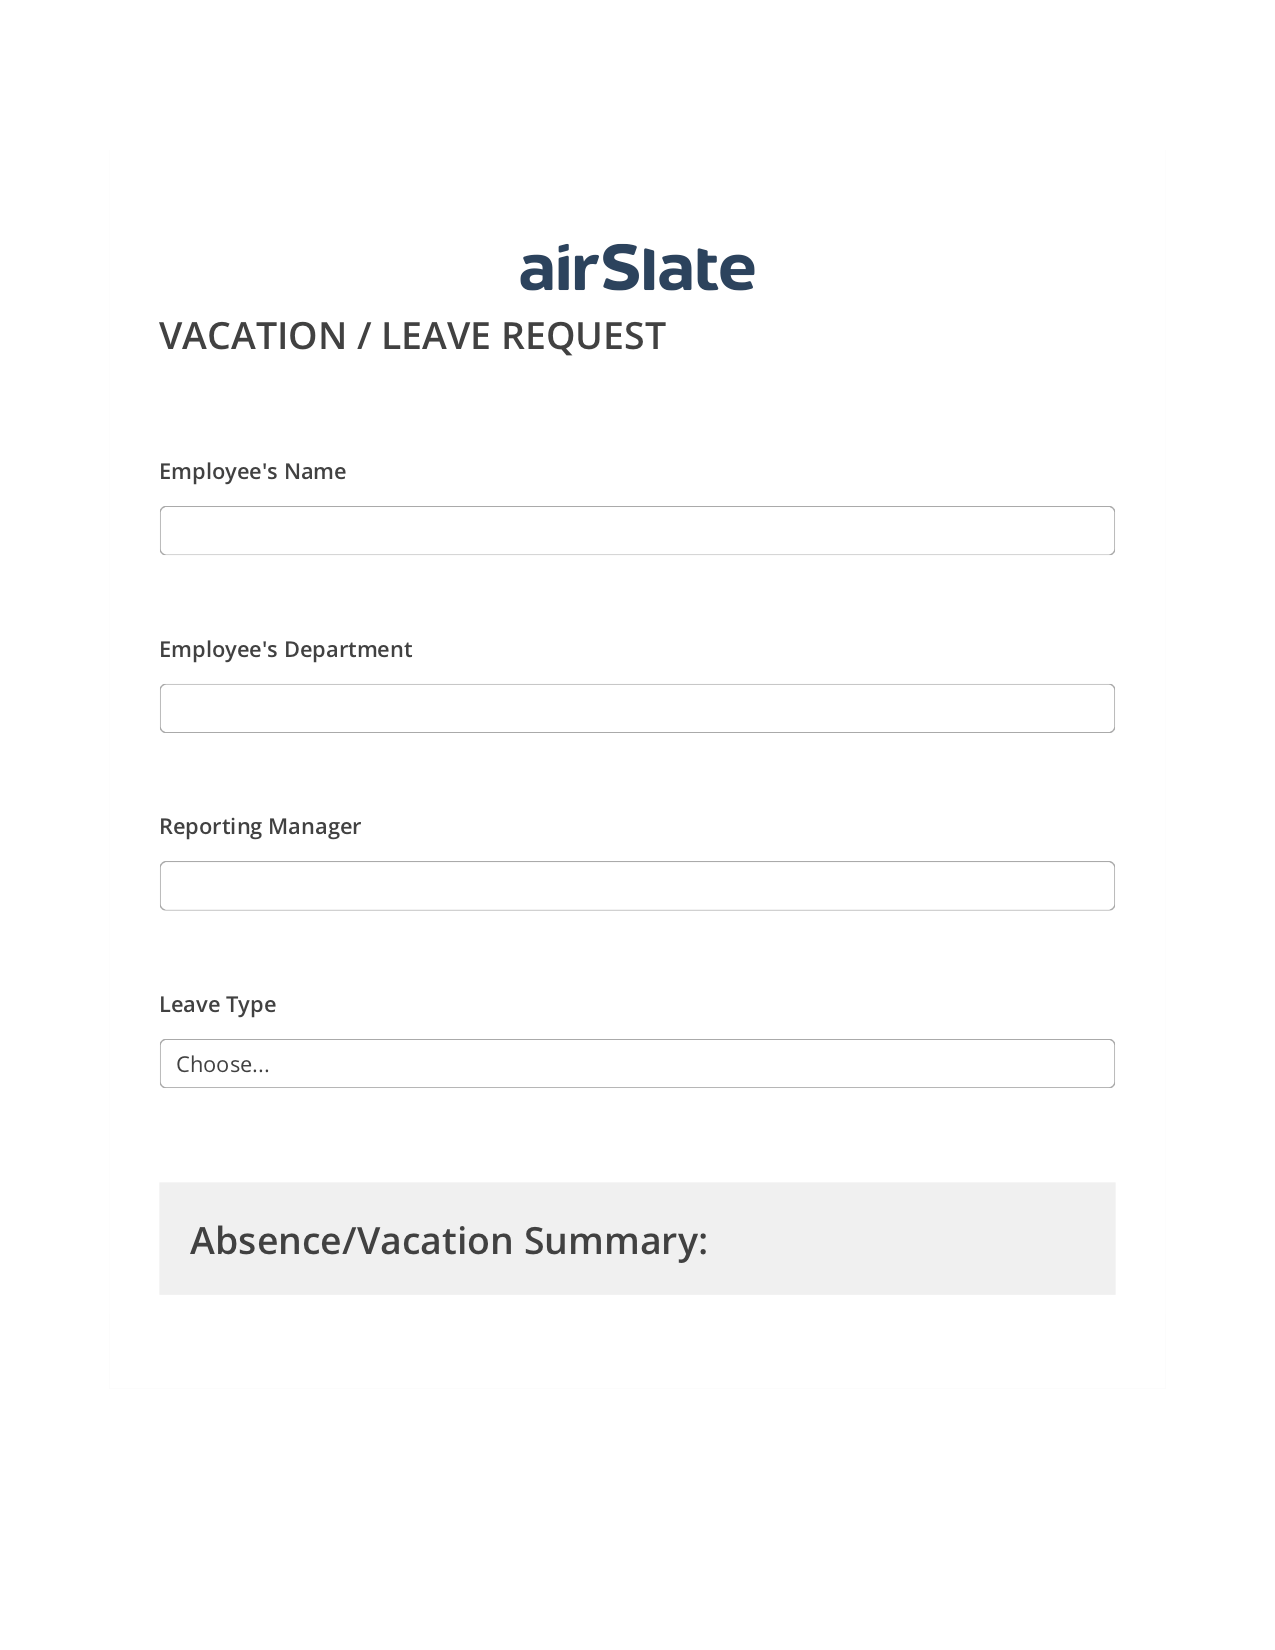 Vacation/Leave Request Workflow Pre-fill from another Slate Bot, Revoke Access Bot, Export to Excel 365 Bot